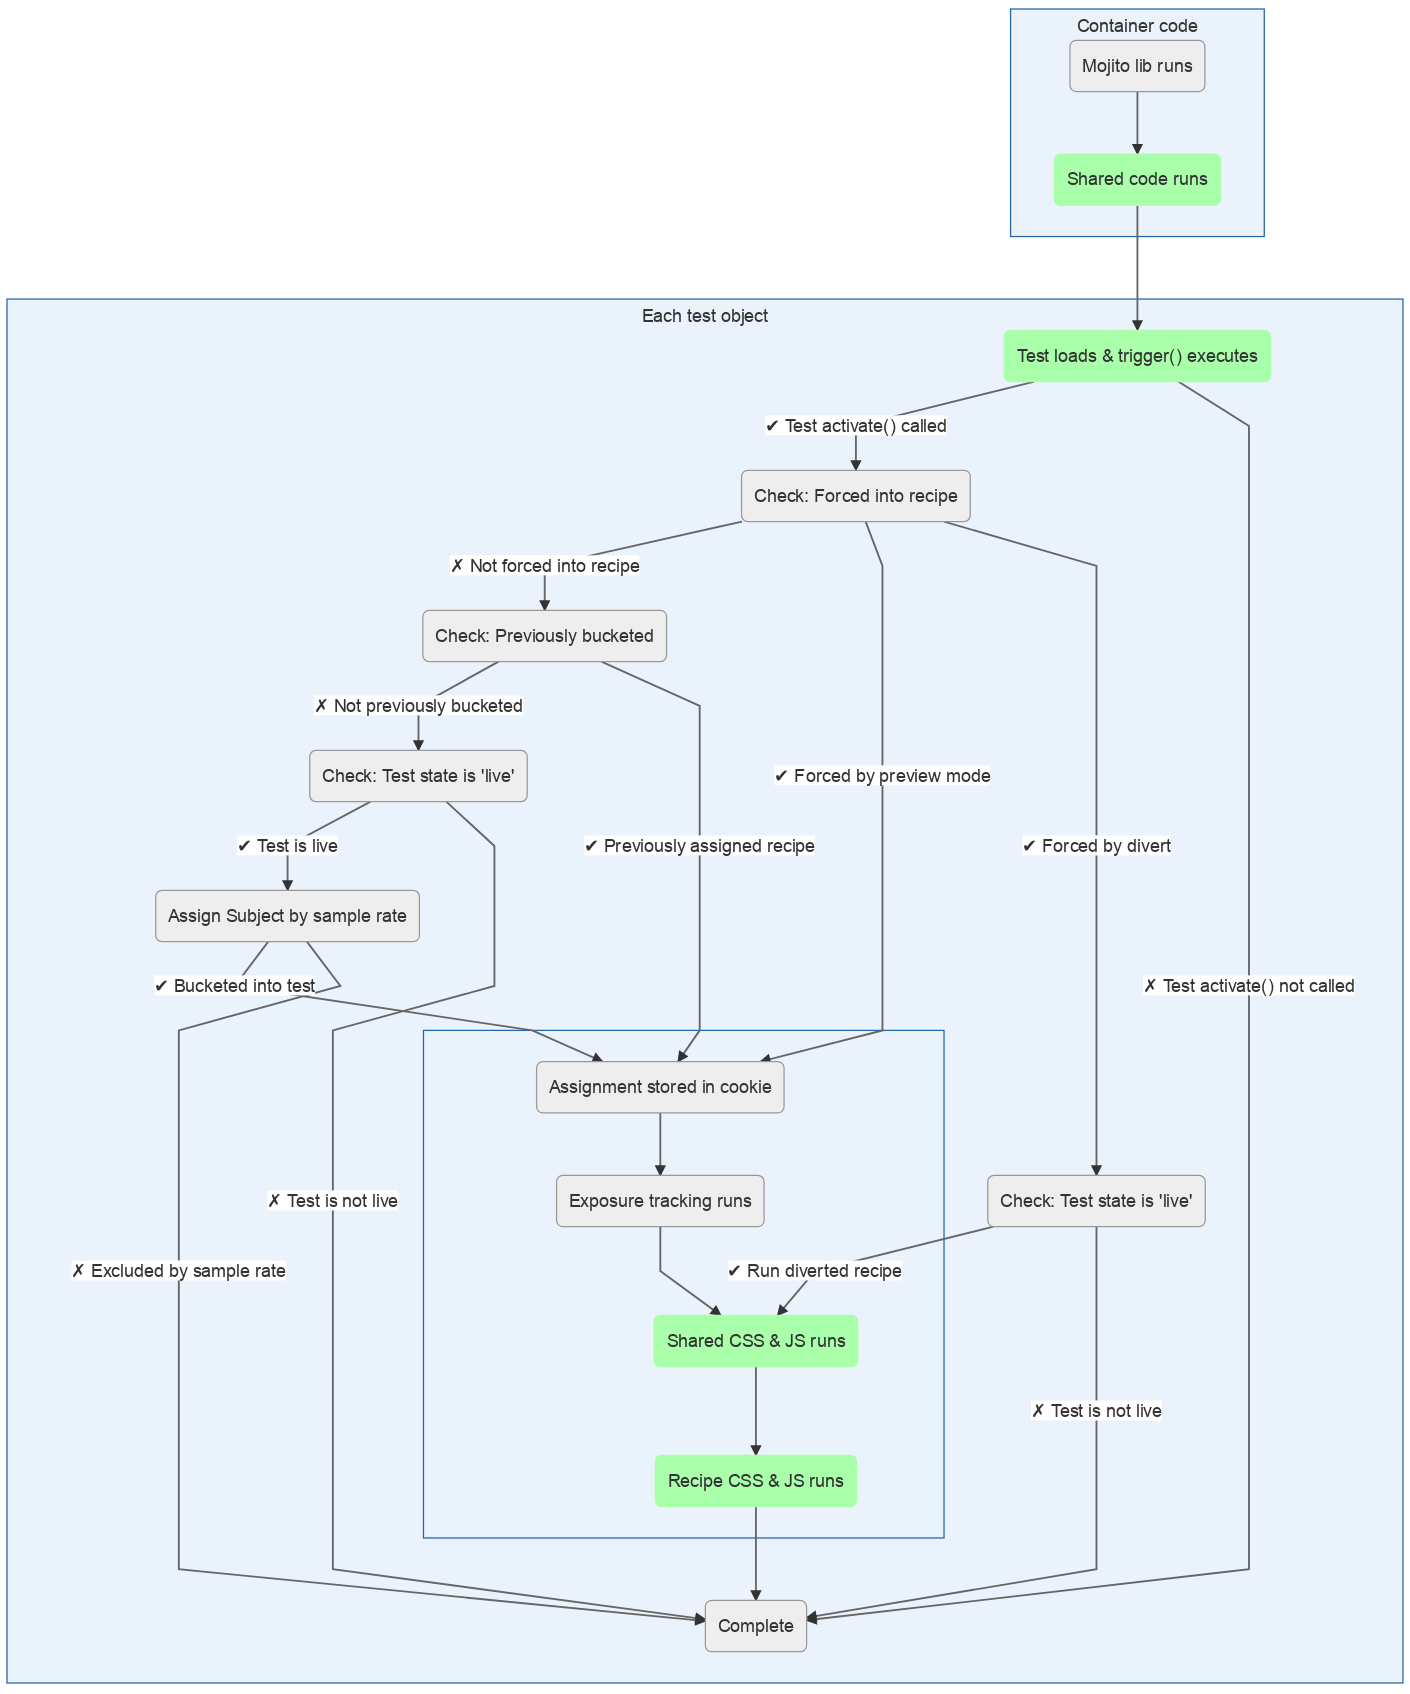 Mojito JS Delivery split test activation and order of execution flowchart.